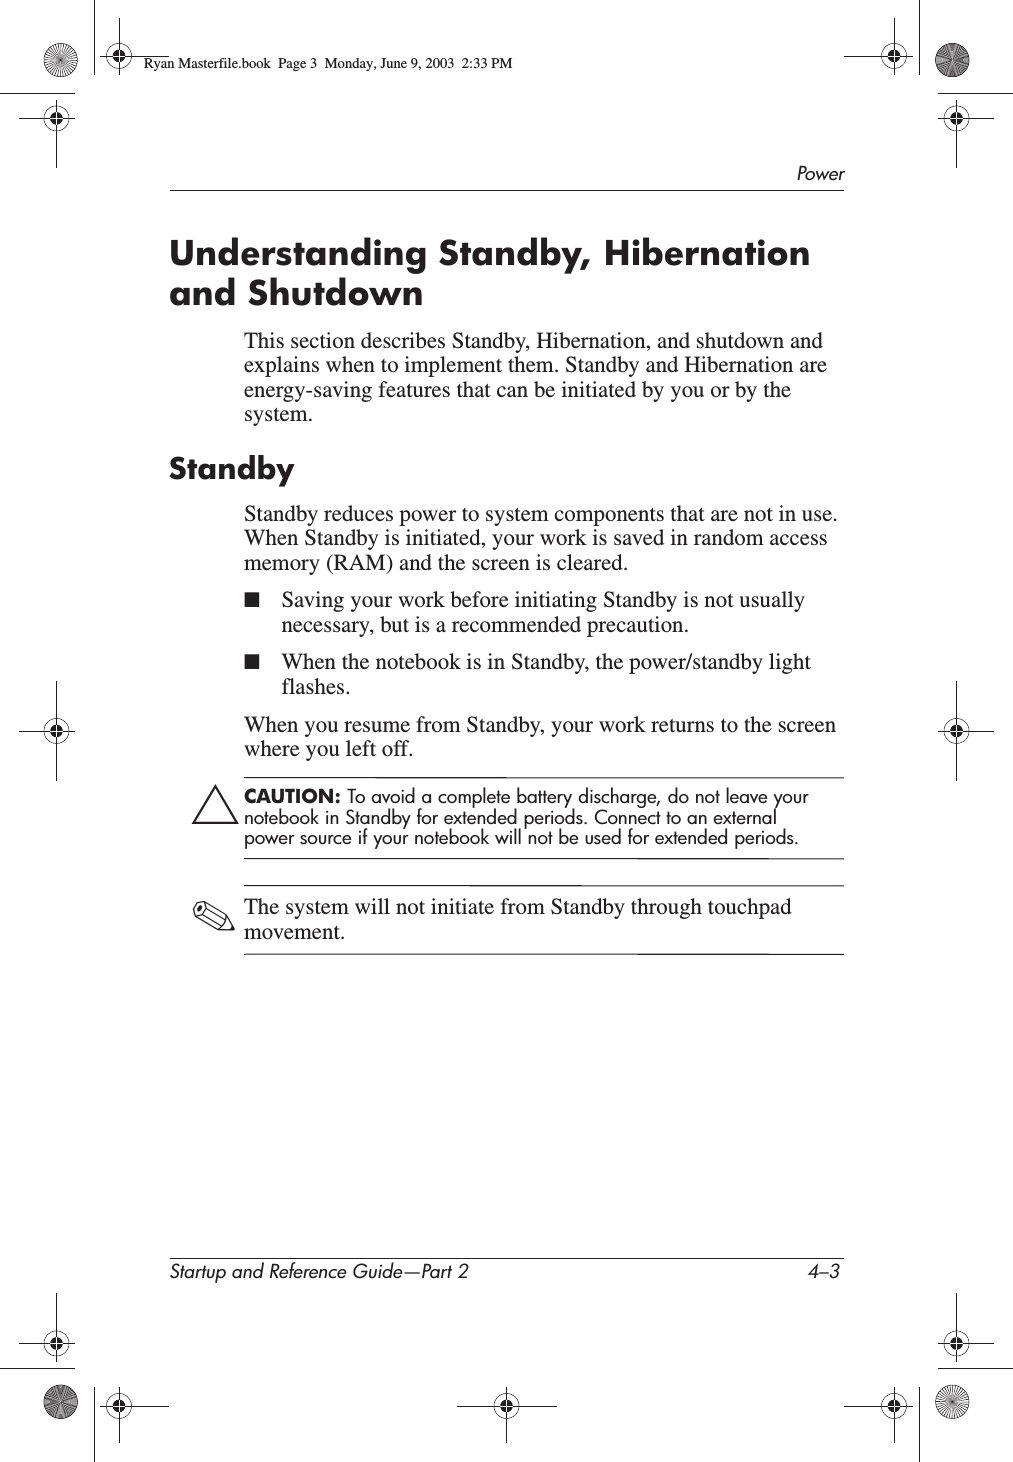 PowerStartup and Reference Guide—Part 2 4–3Understanding Standby, Hibernation and ShutdownThis section describes Standby, Hibernation, and shutdown and explains when to implement them. Standby and Hibernation are energy-saving features that can be initiated by you or by the system.StandbyStandby reduces power to system components that are not in use. When Standby is initiated, your work is saved in random access memory (RAM) and the screen is cleared.■Saving your work before initiating Standby is not usually necessary, but is a recommended precaution.■When the notebook is in Standby, the power/standby light flashes.When you resume from Standby, your work returns to the screen where you left off.ÄCAUTION: To avoid a complete battery discharge, do not leave your notebook in Standby for extended periods. Connect to an external power source if your notebook will not be used for extended periods.✎The system will not initiate from Standby through touchpad movement.Ryan Masterfile.book  Page 3  Monday, June 9, 2003  2:33 PM